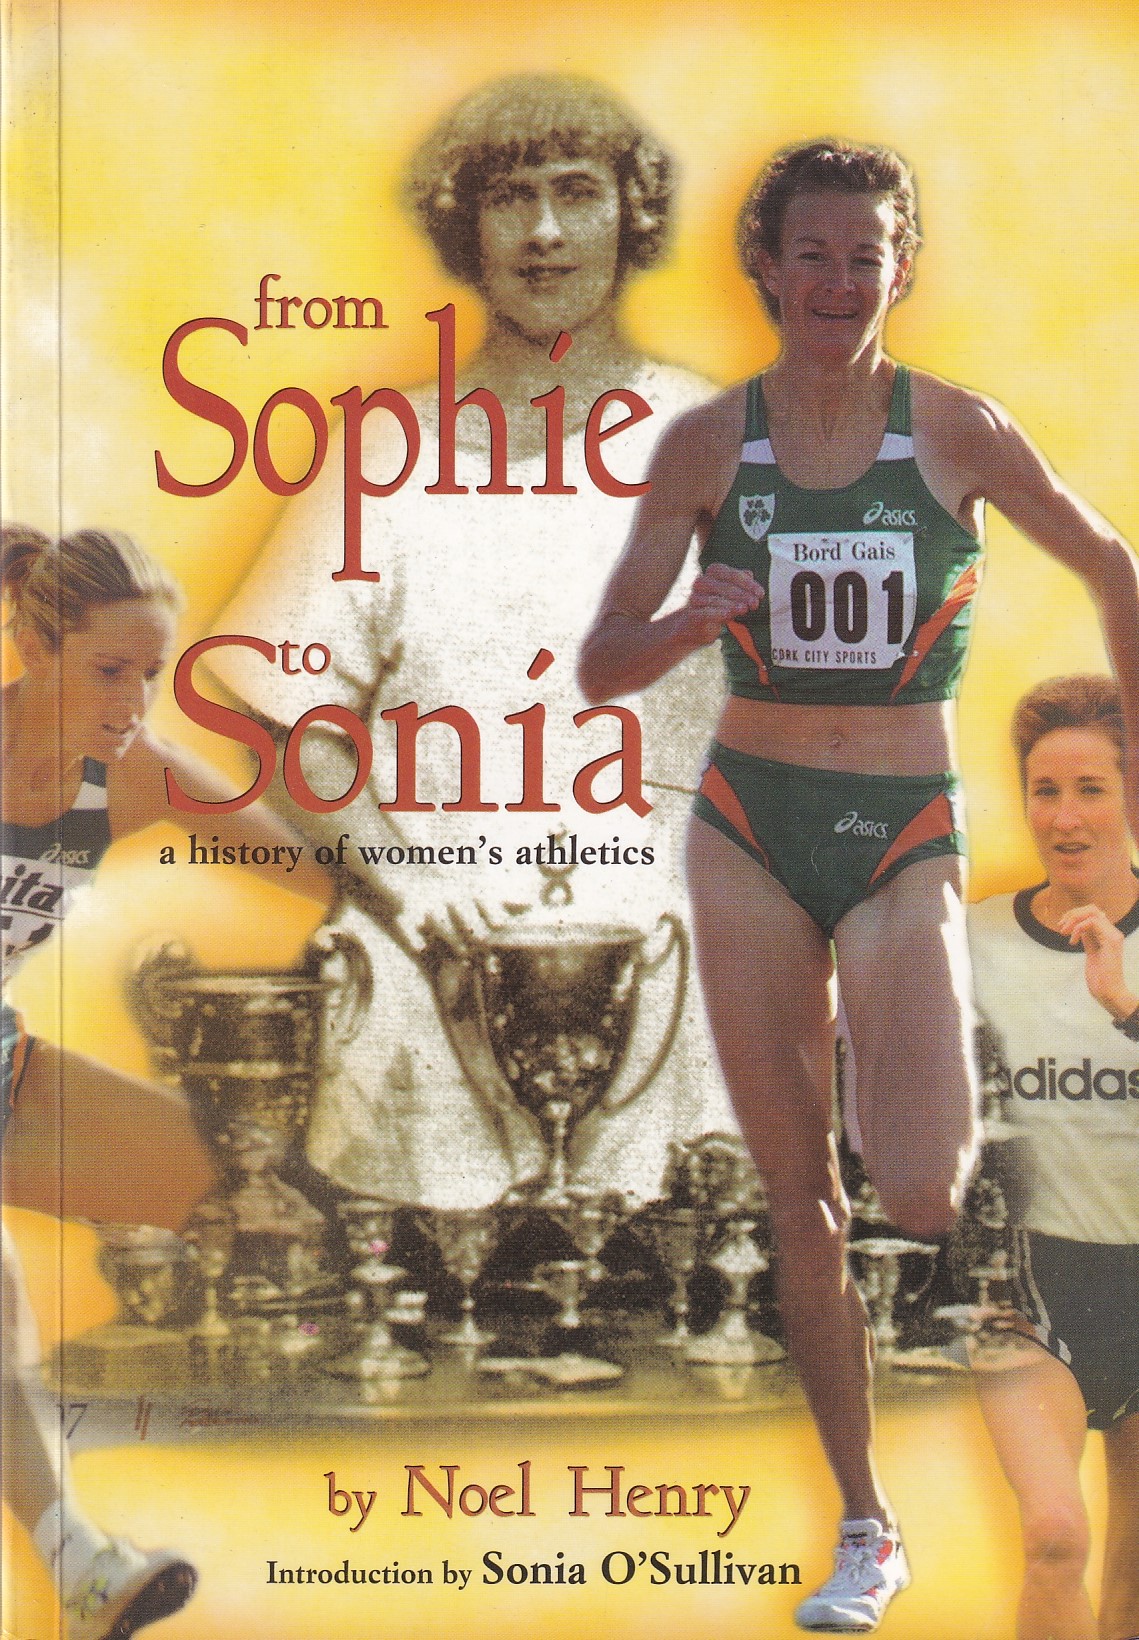 From Sophie to Sonia: A history of women’s athletics [Signed] | Noel Henry | Charlie Byrne's